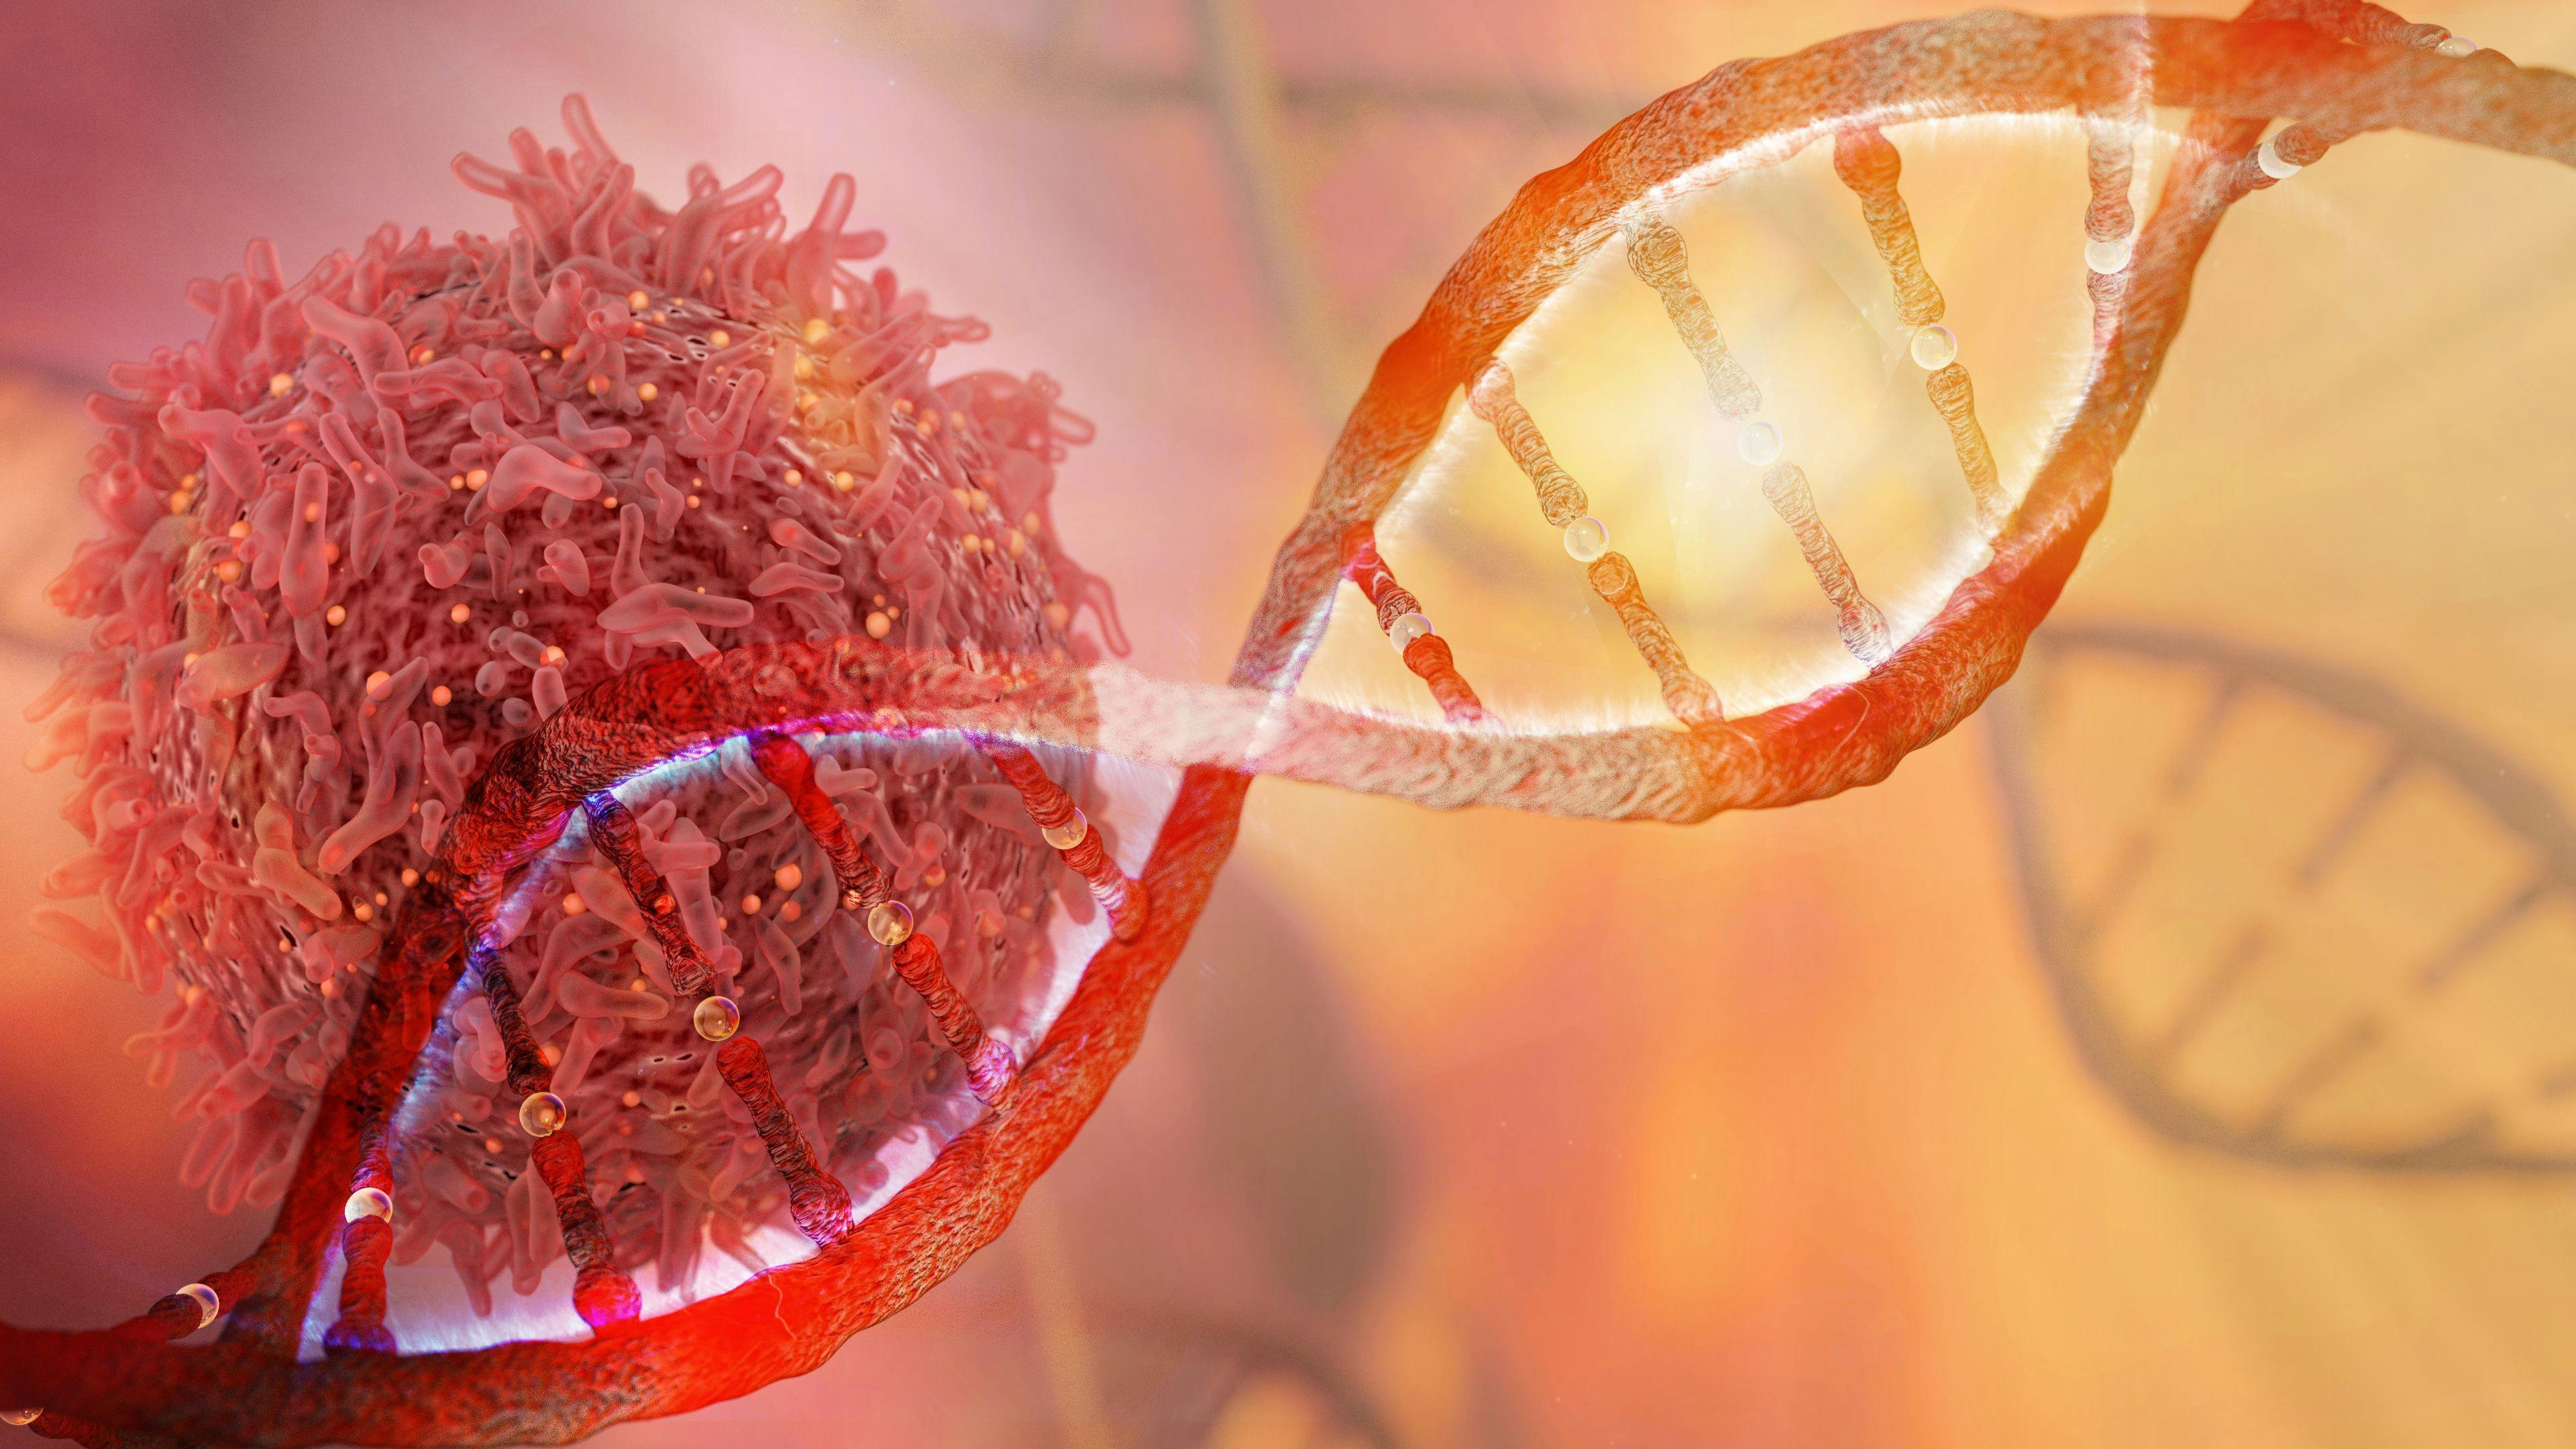 DNA strand and Cancer Cell Oncology Research Concept 3D rendering | Image Credit: catalin - stock.adobe.com